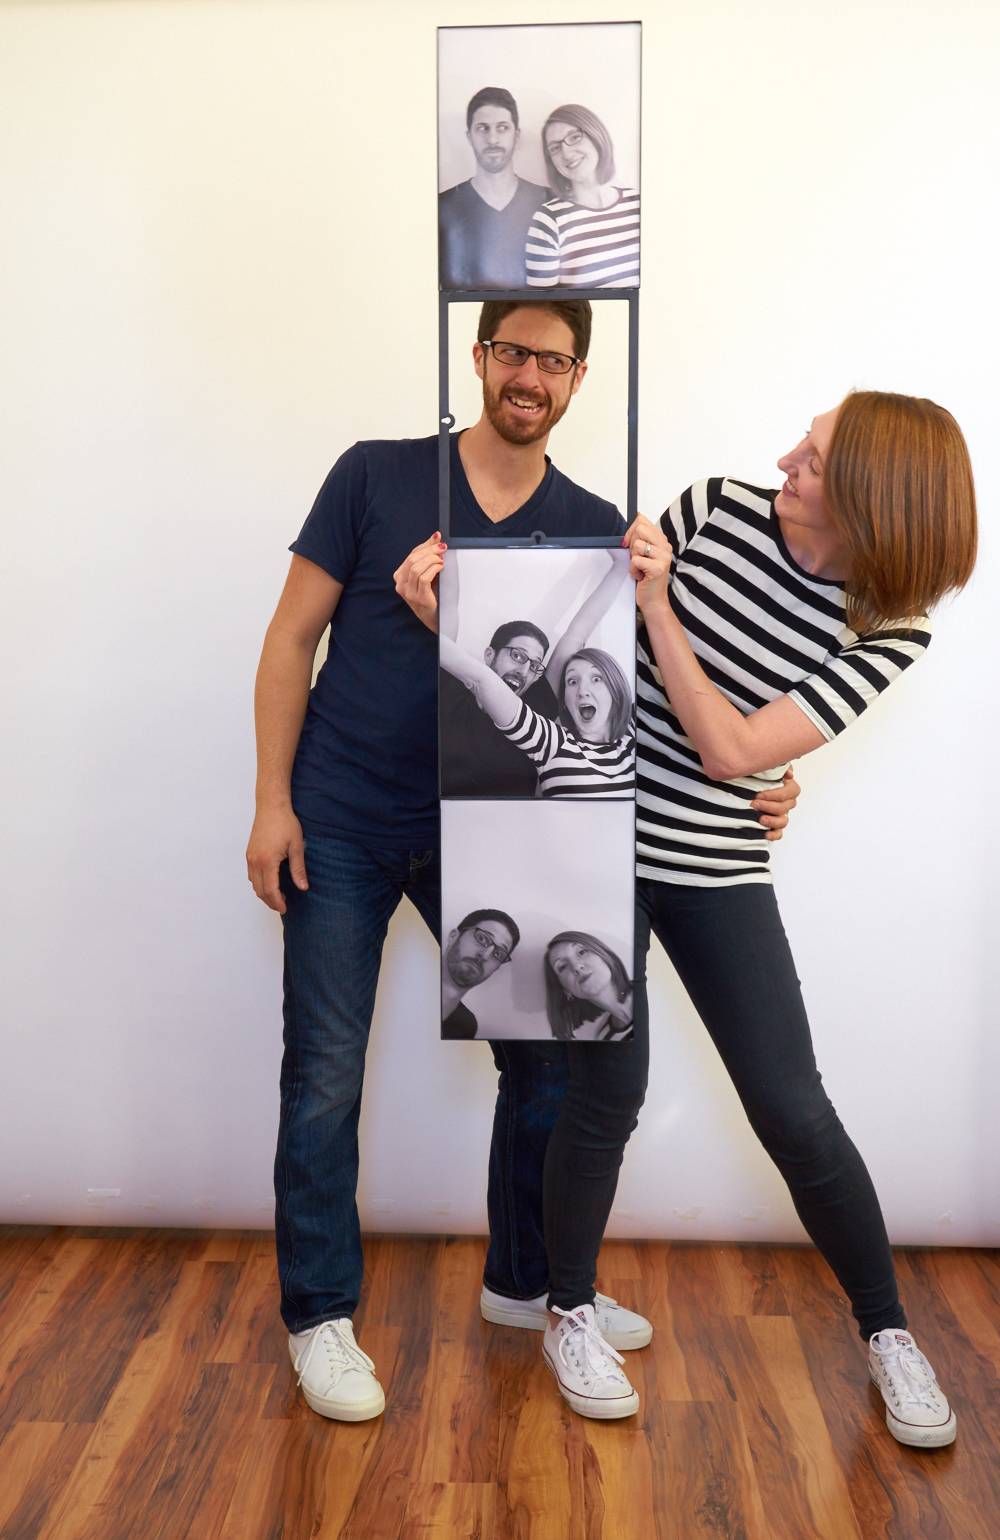 A man and a woman posing behind three photos of them.